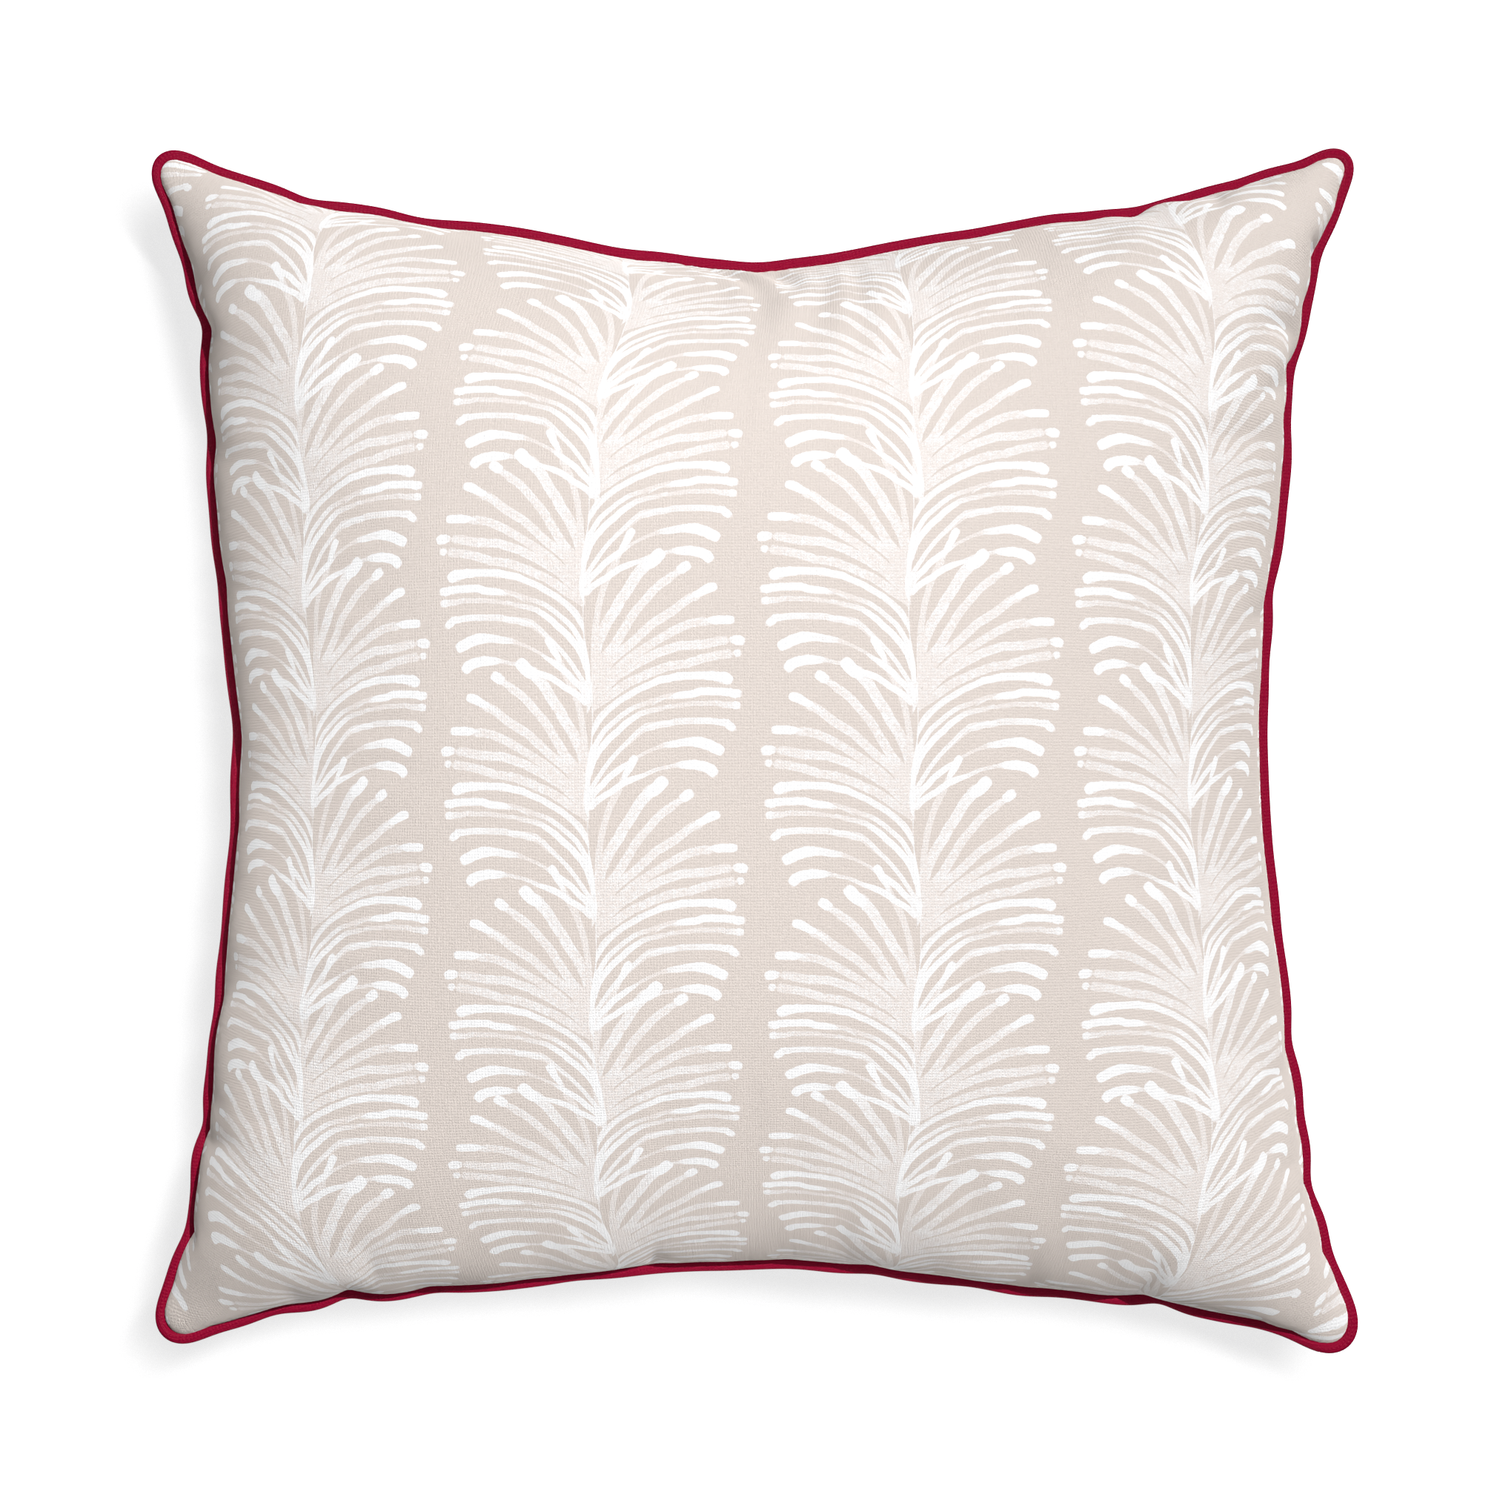 Euro-sham emma sand custom pillow with raspberry piping on white background